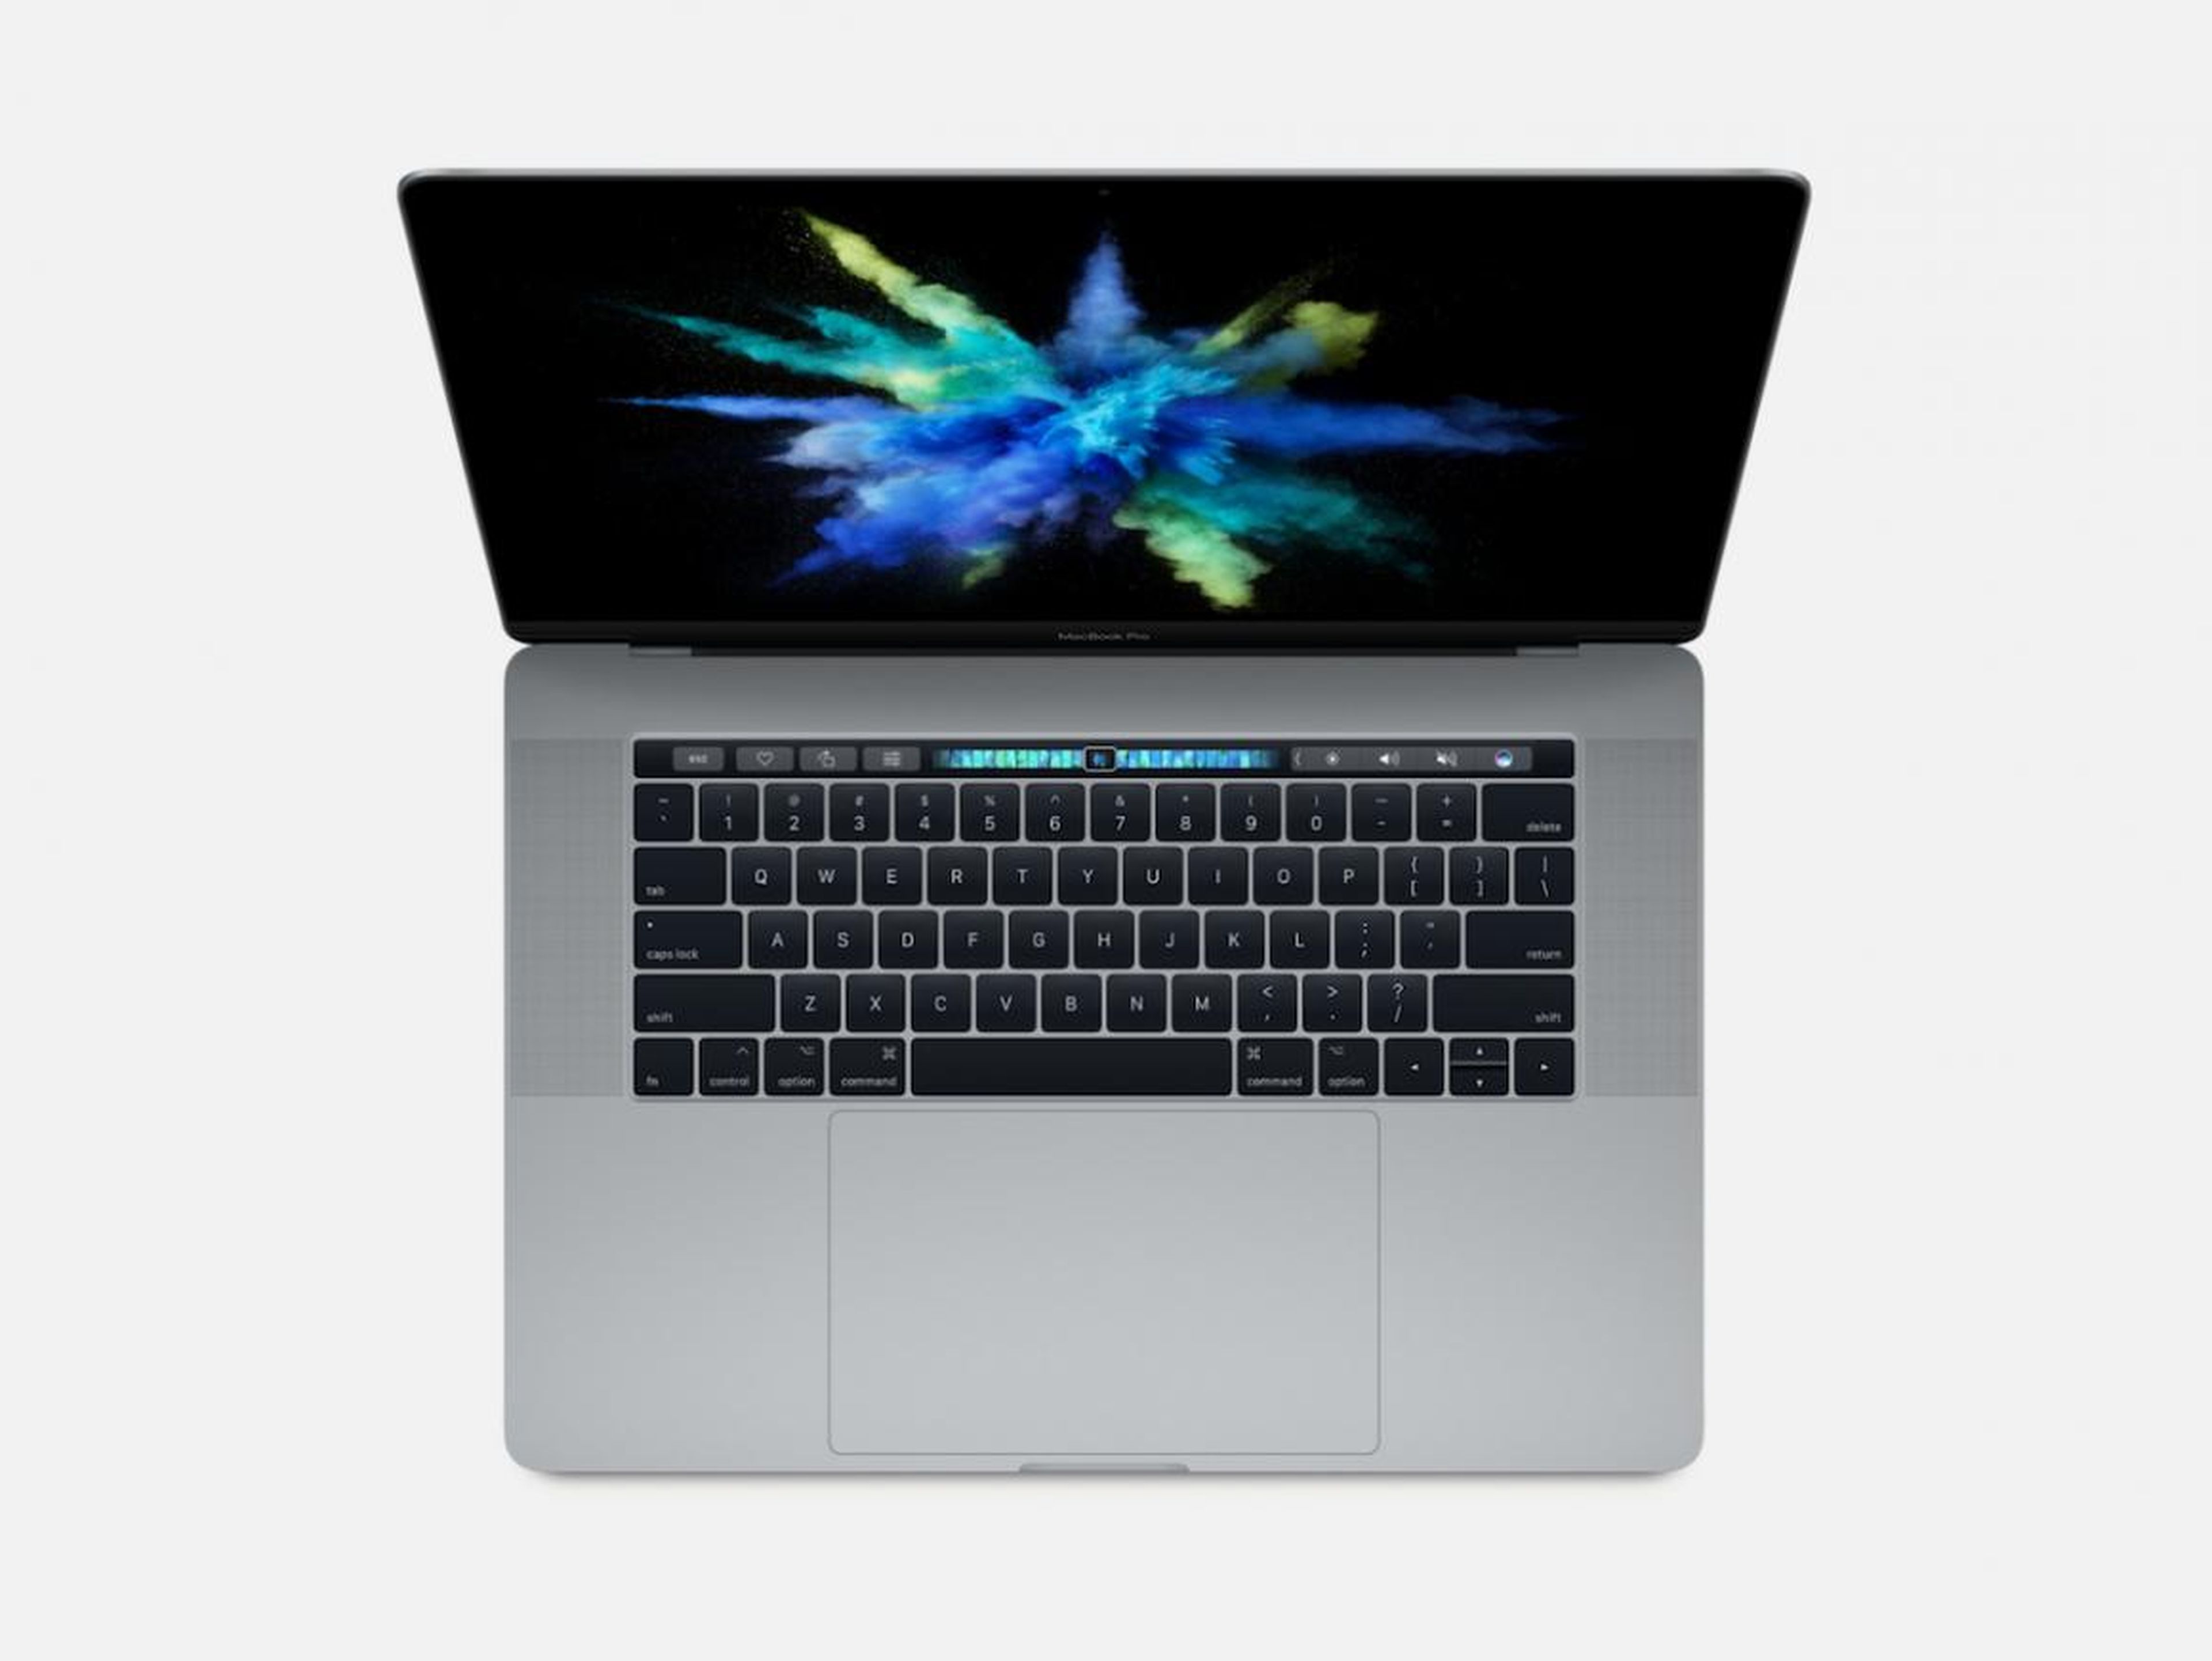 Apple's most powerful MacBook Pros don't reach their full potential, even after Apple fixed the overheating issue.